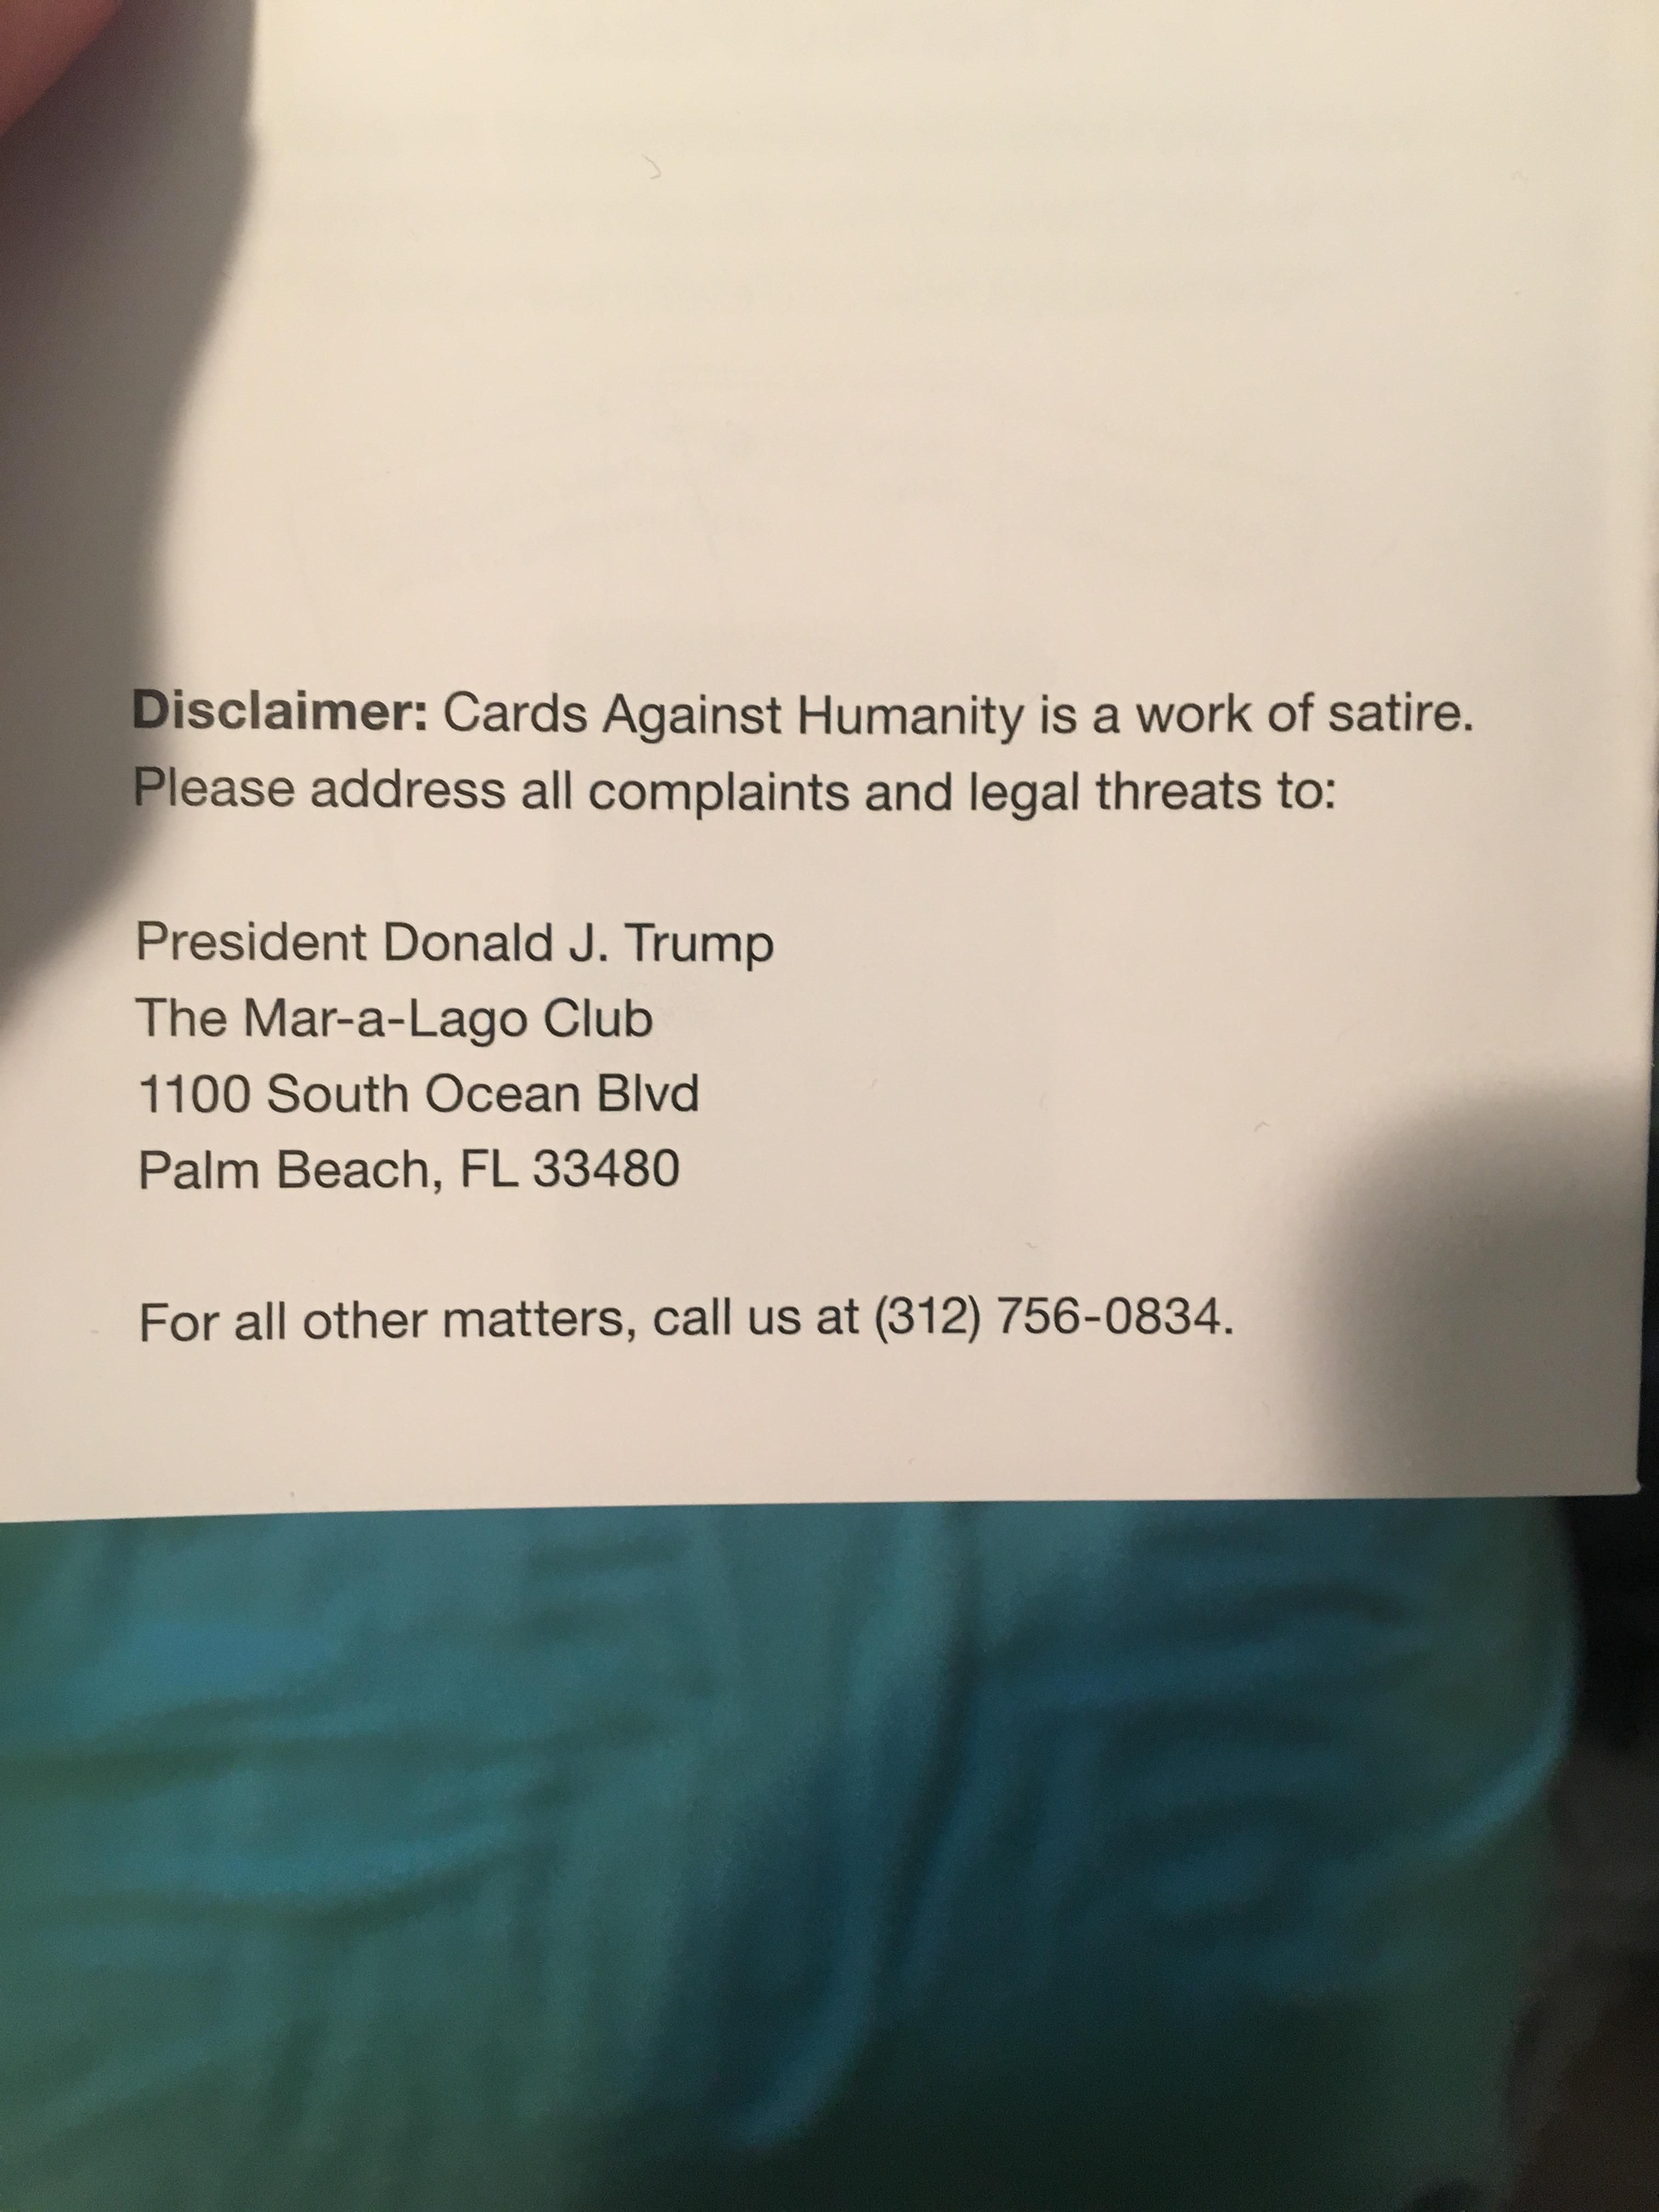 My girlfriends parents gave me Cards Against Humanity for Christmas. This was on the back of the Rules Pamphlet.